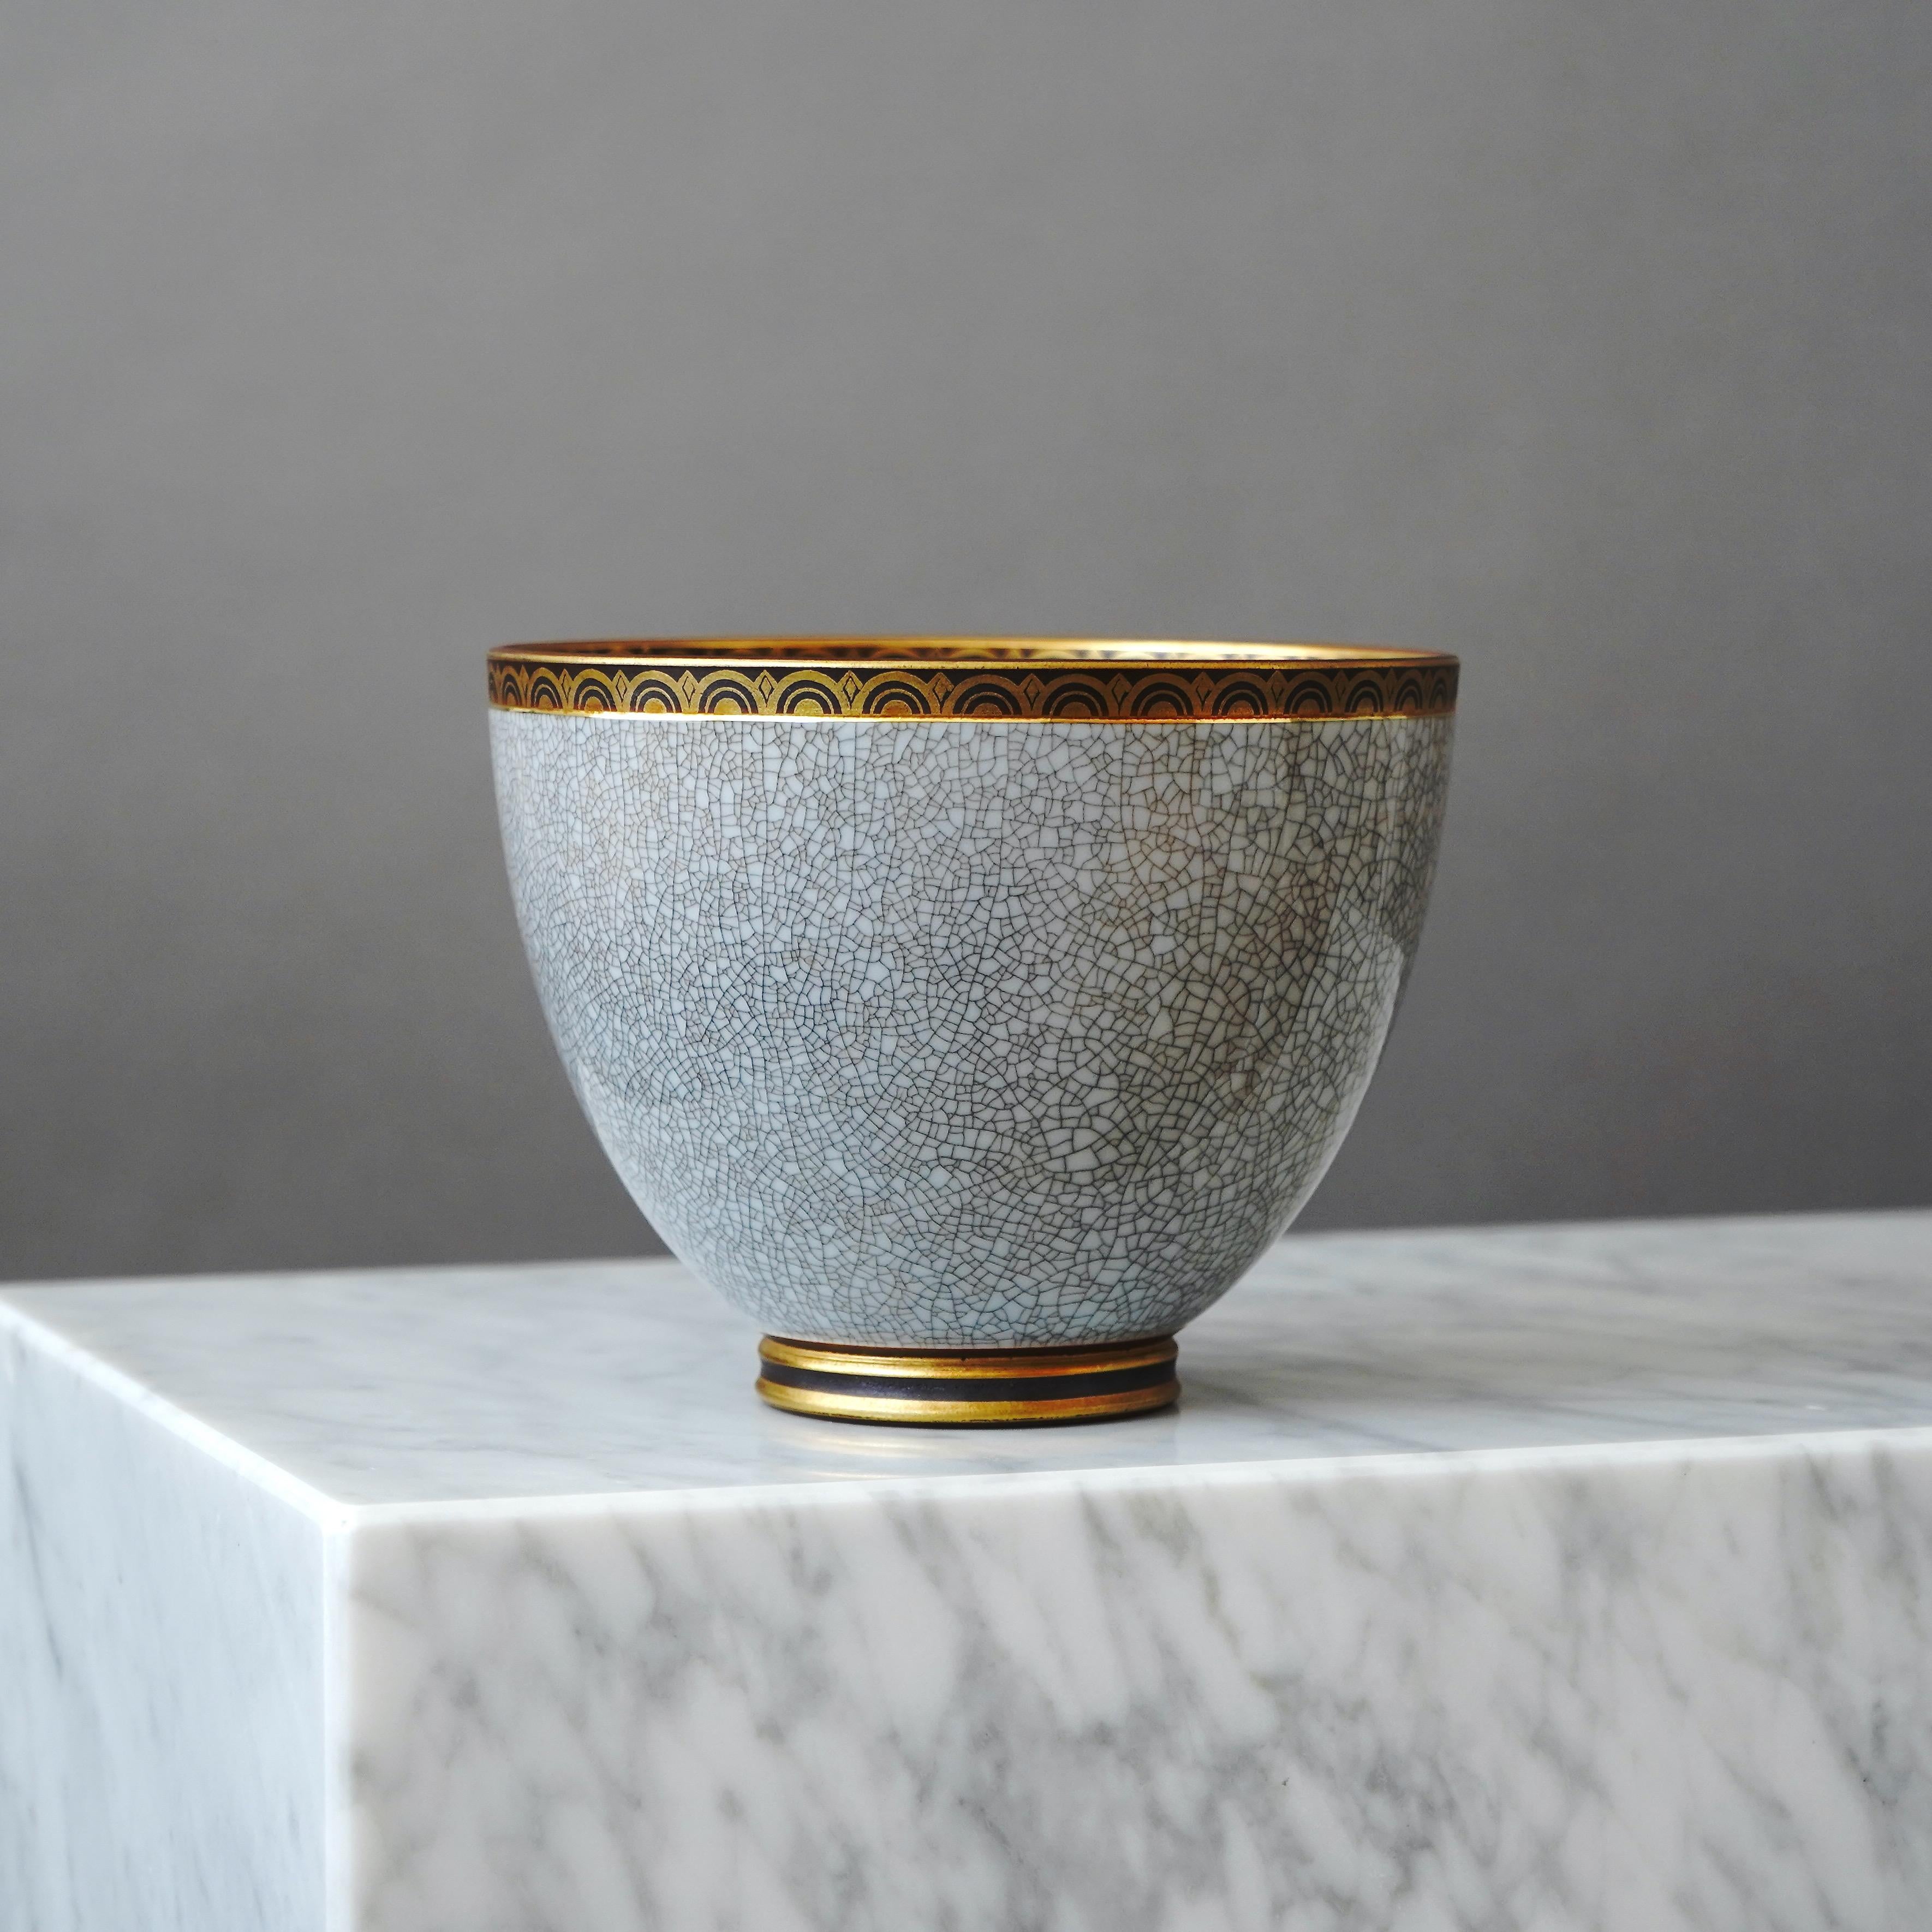 A beautiful stoneware art deco bowl with crackle glaze. Foot and mouth detailed in hand painted gold.
Designed by Gunnar Nylund for ALP (Lidköpings Porslinsfabrik), Sweden, 1930s.

Excellent condition.
Stamped 'ALP', 'Modell Nylund', 'Lidköping,